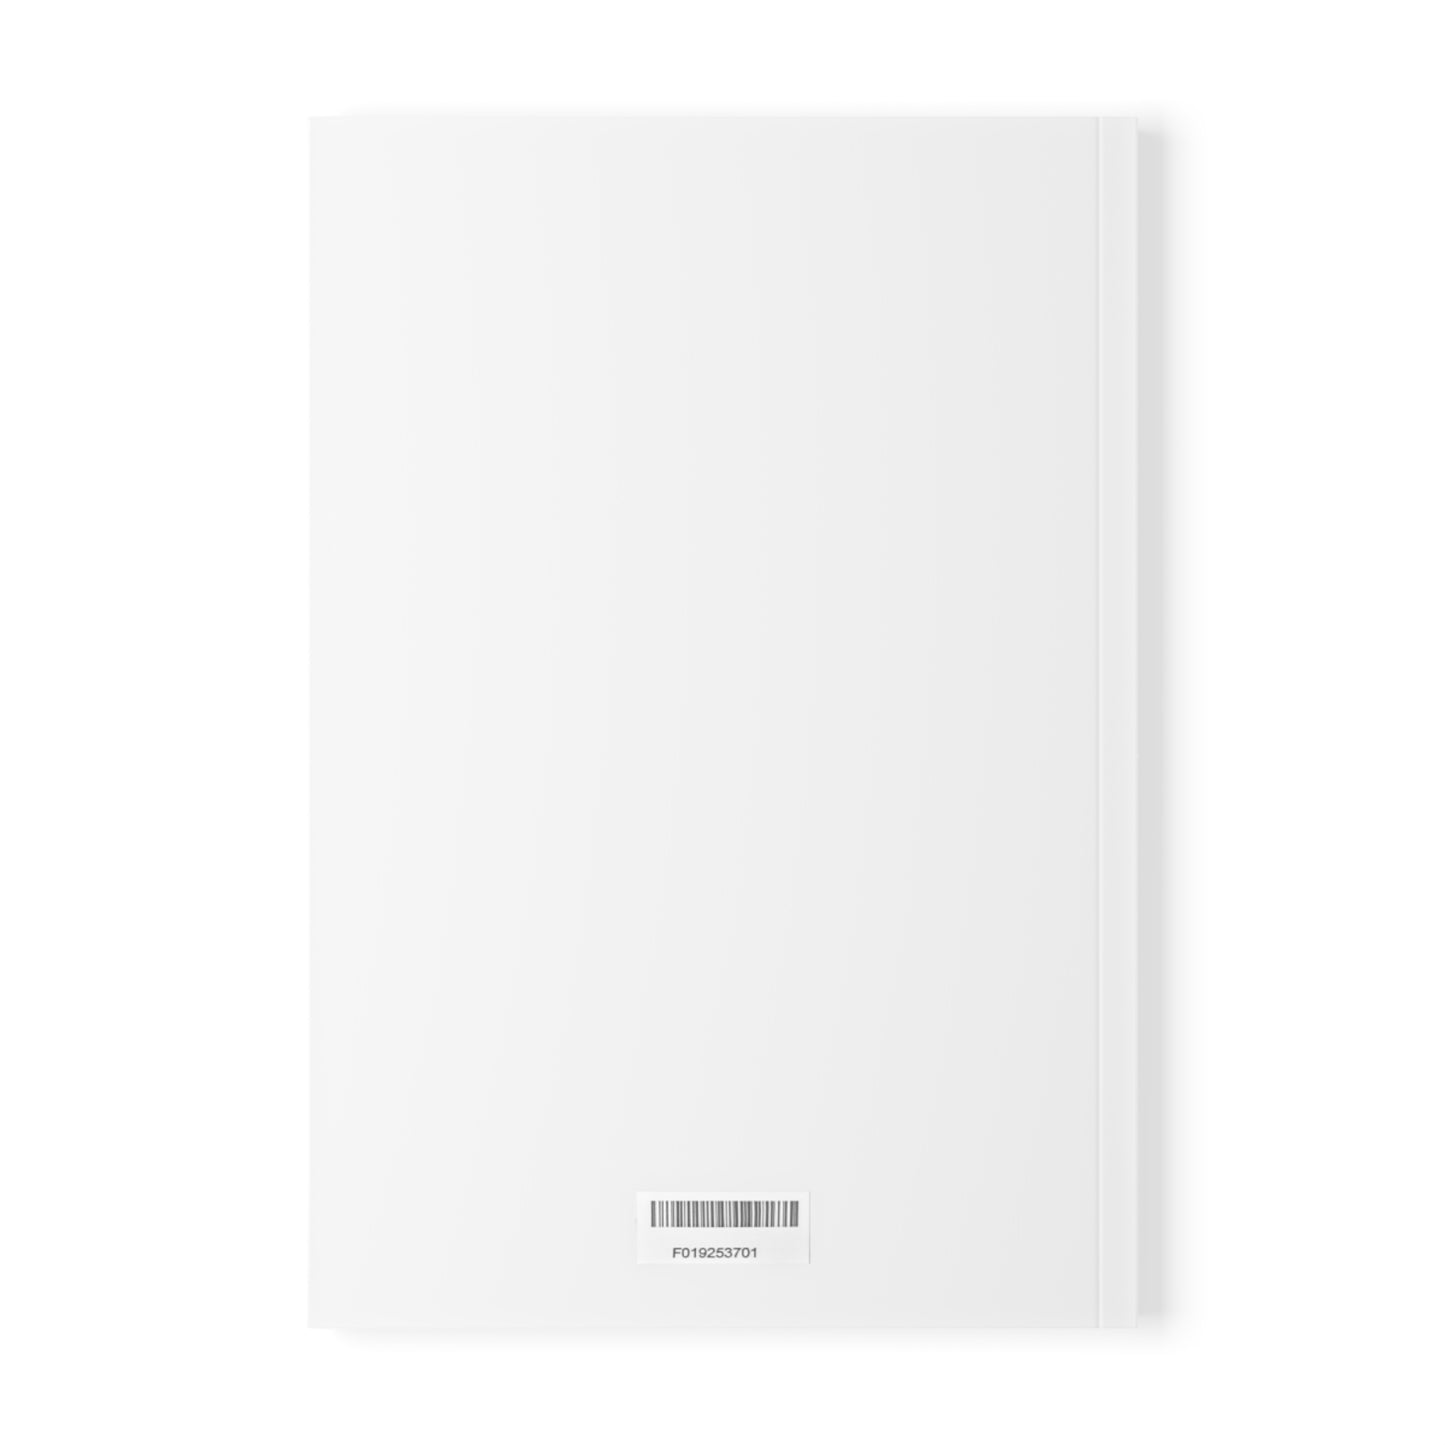 K19 Security Solutions Team One Softcover Notebook